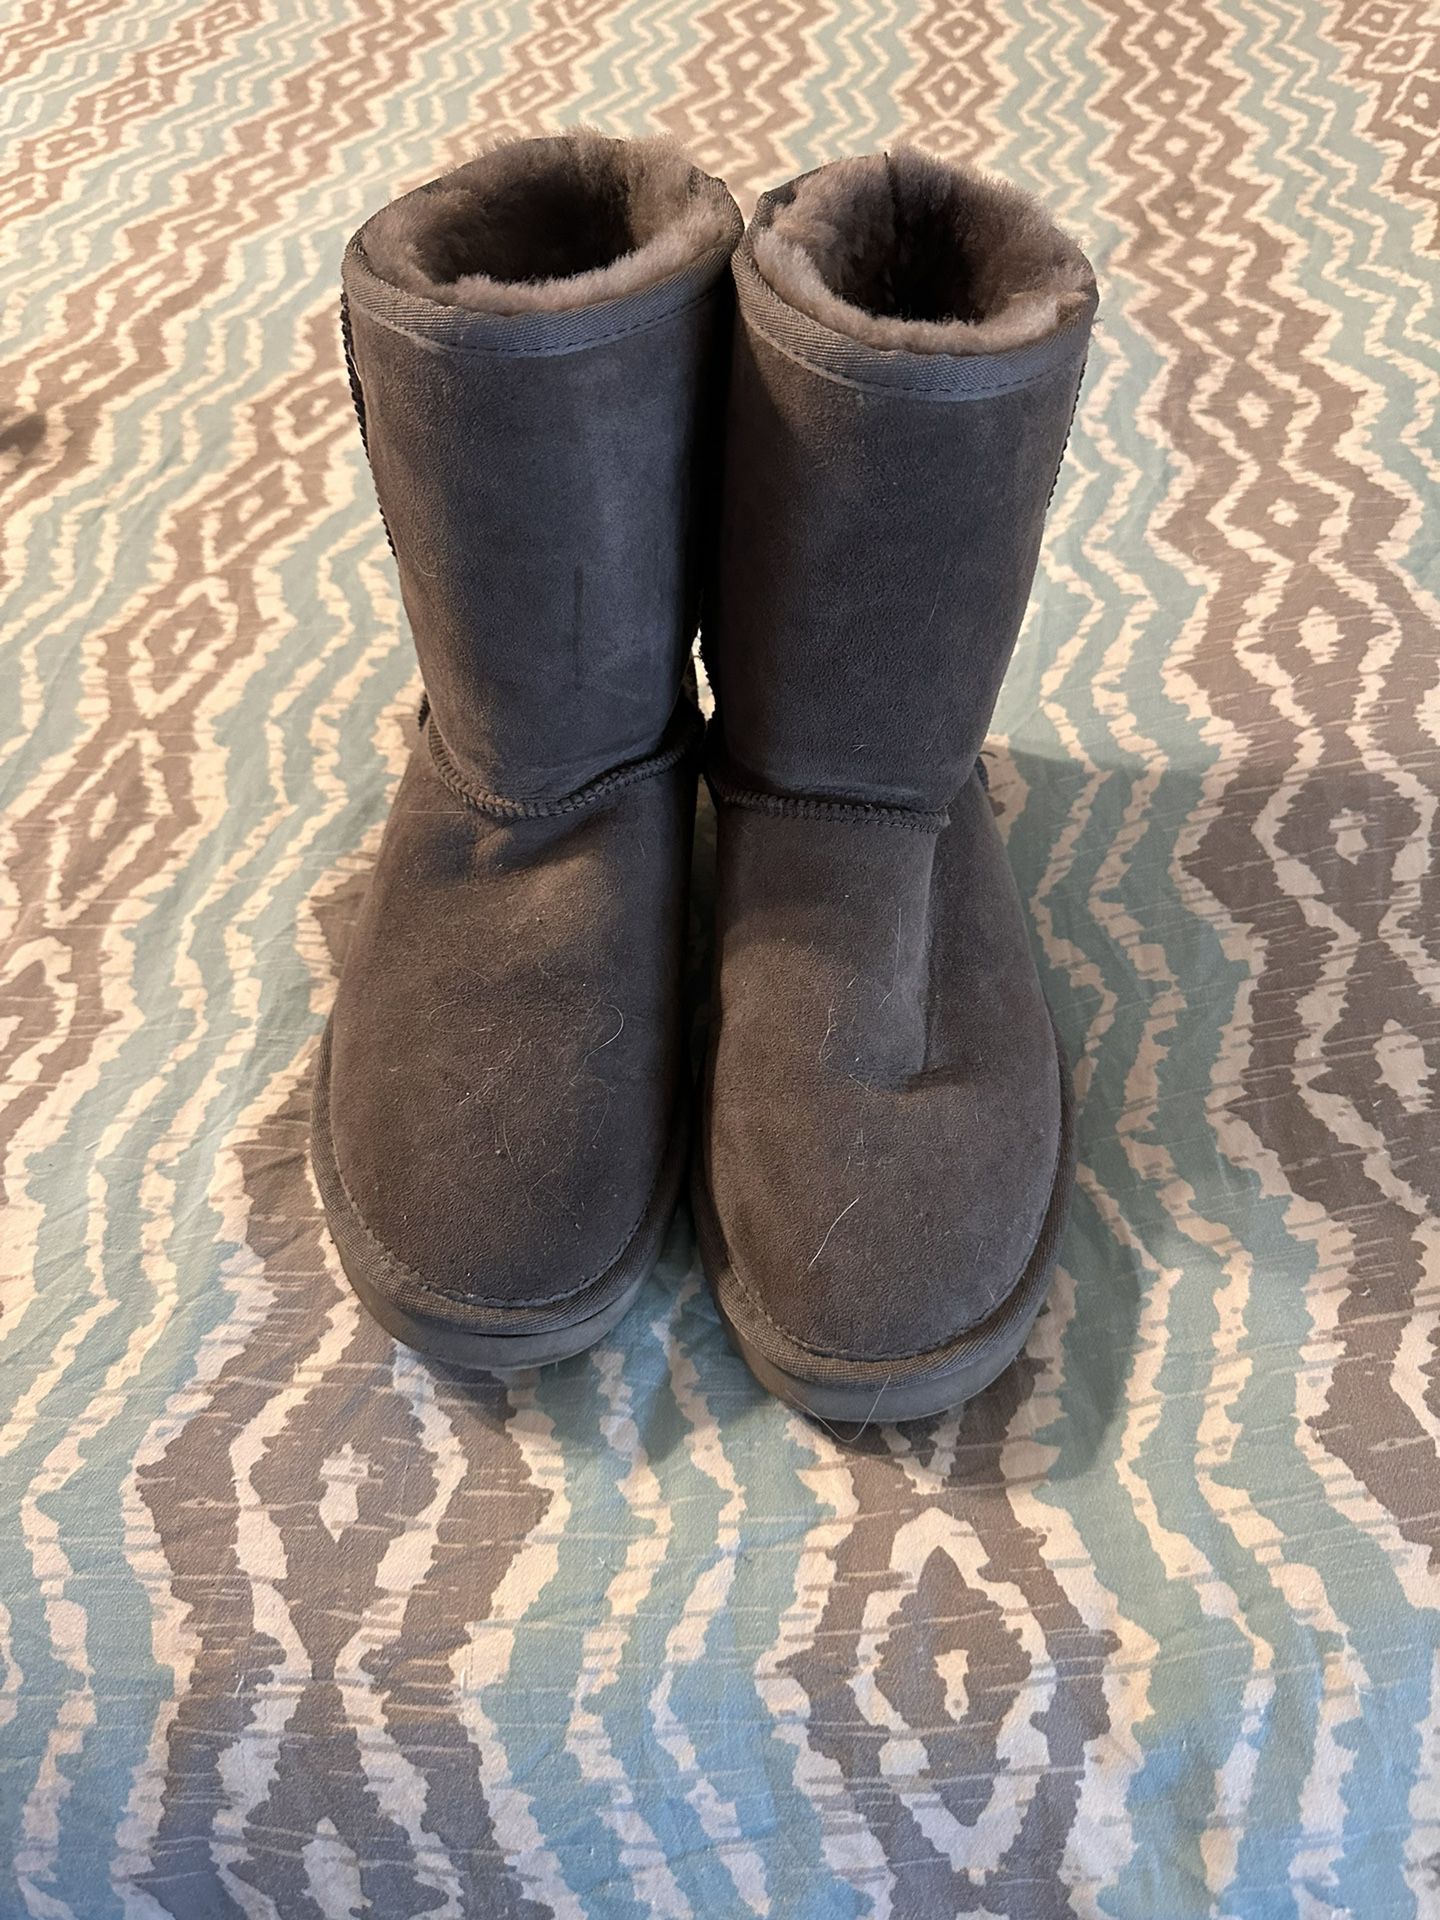 Lady Uggs Boots Size 9 